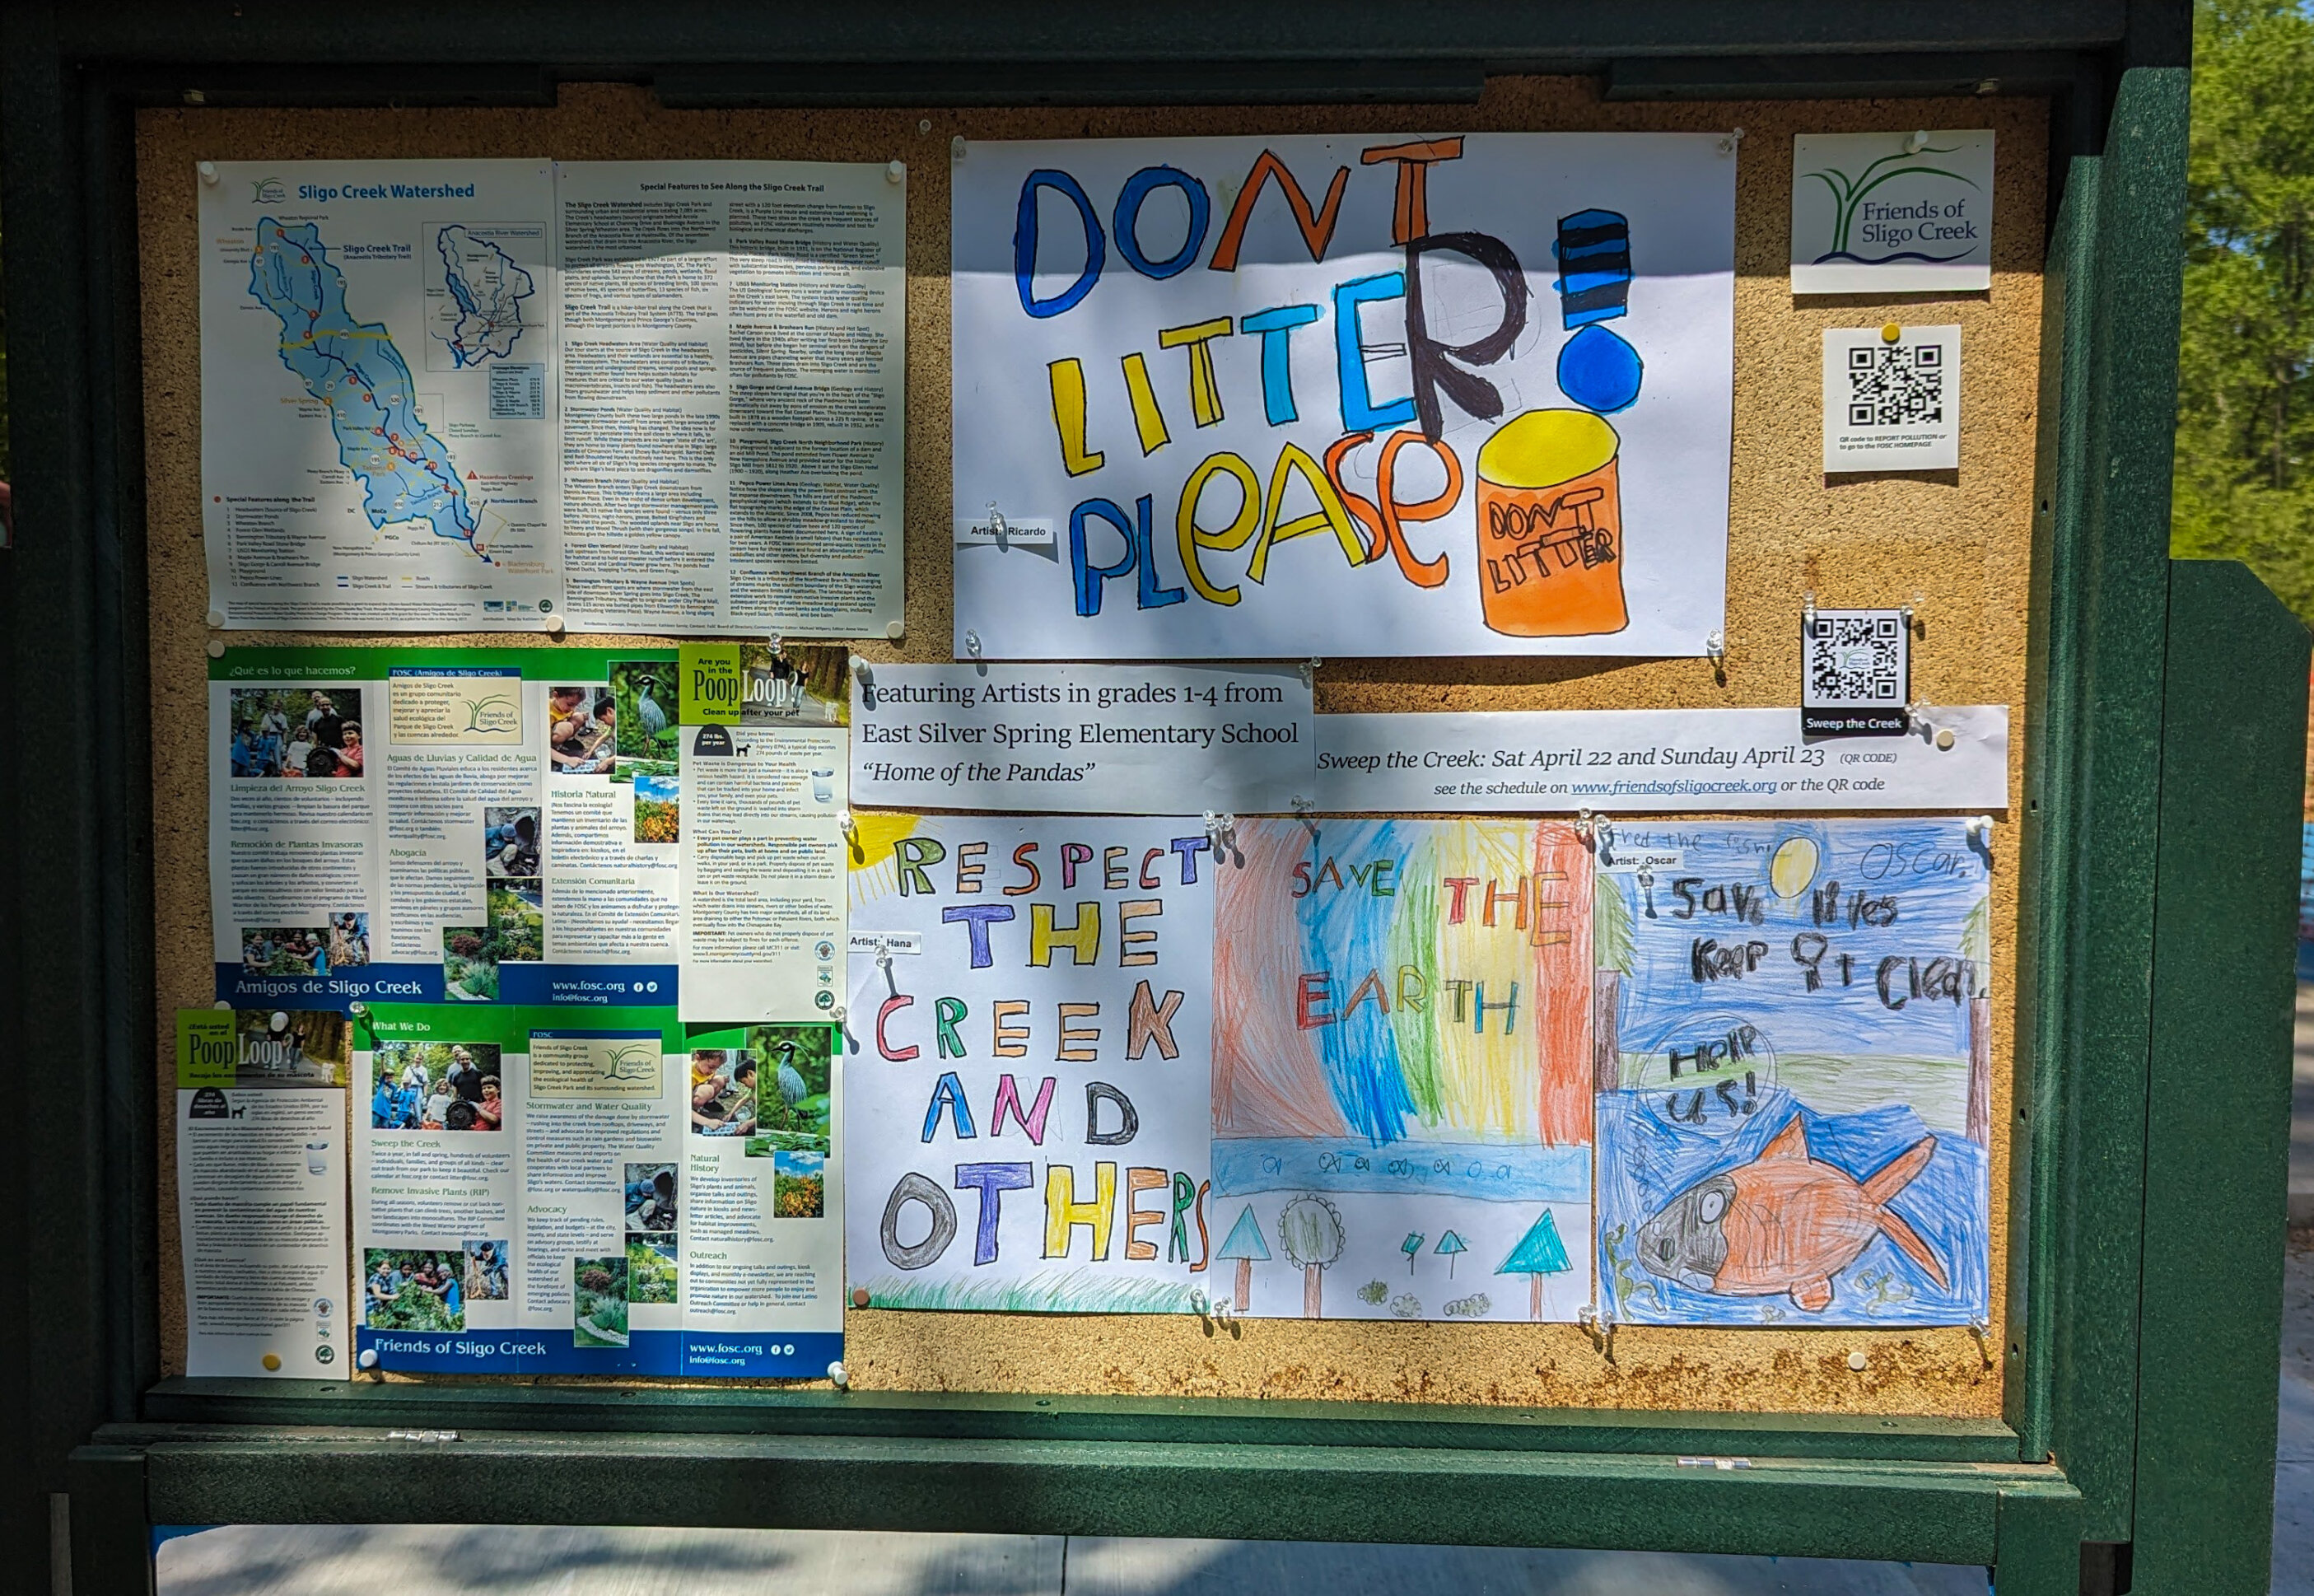 Section 4 Kiosk exhibiting students' artwork about Sweeping the Creek of litter.